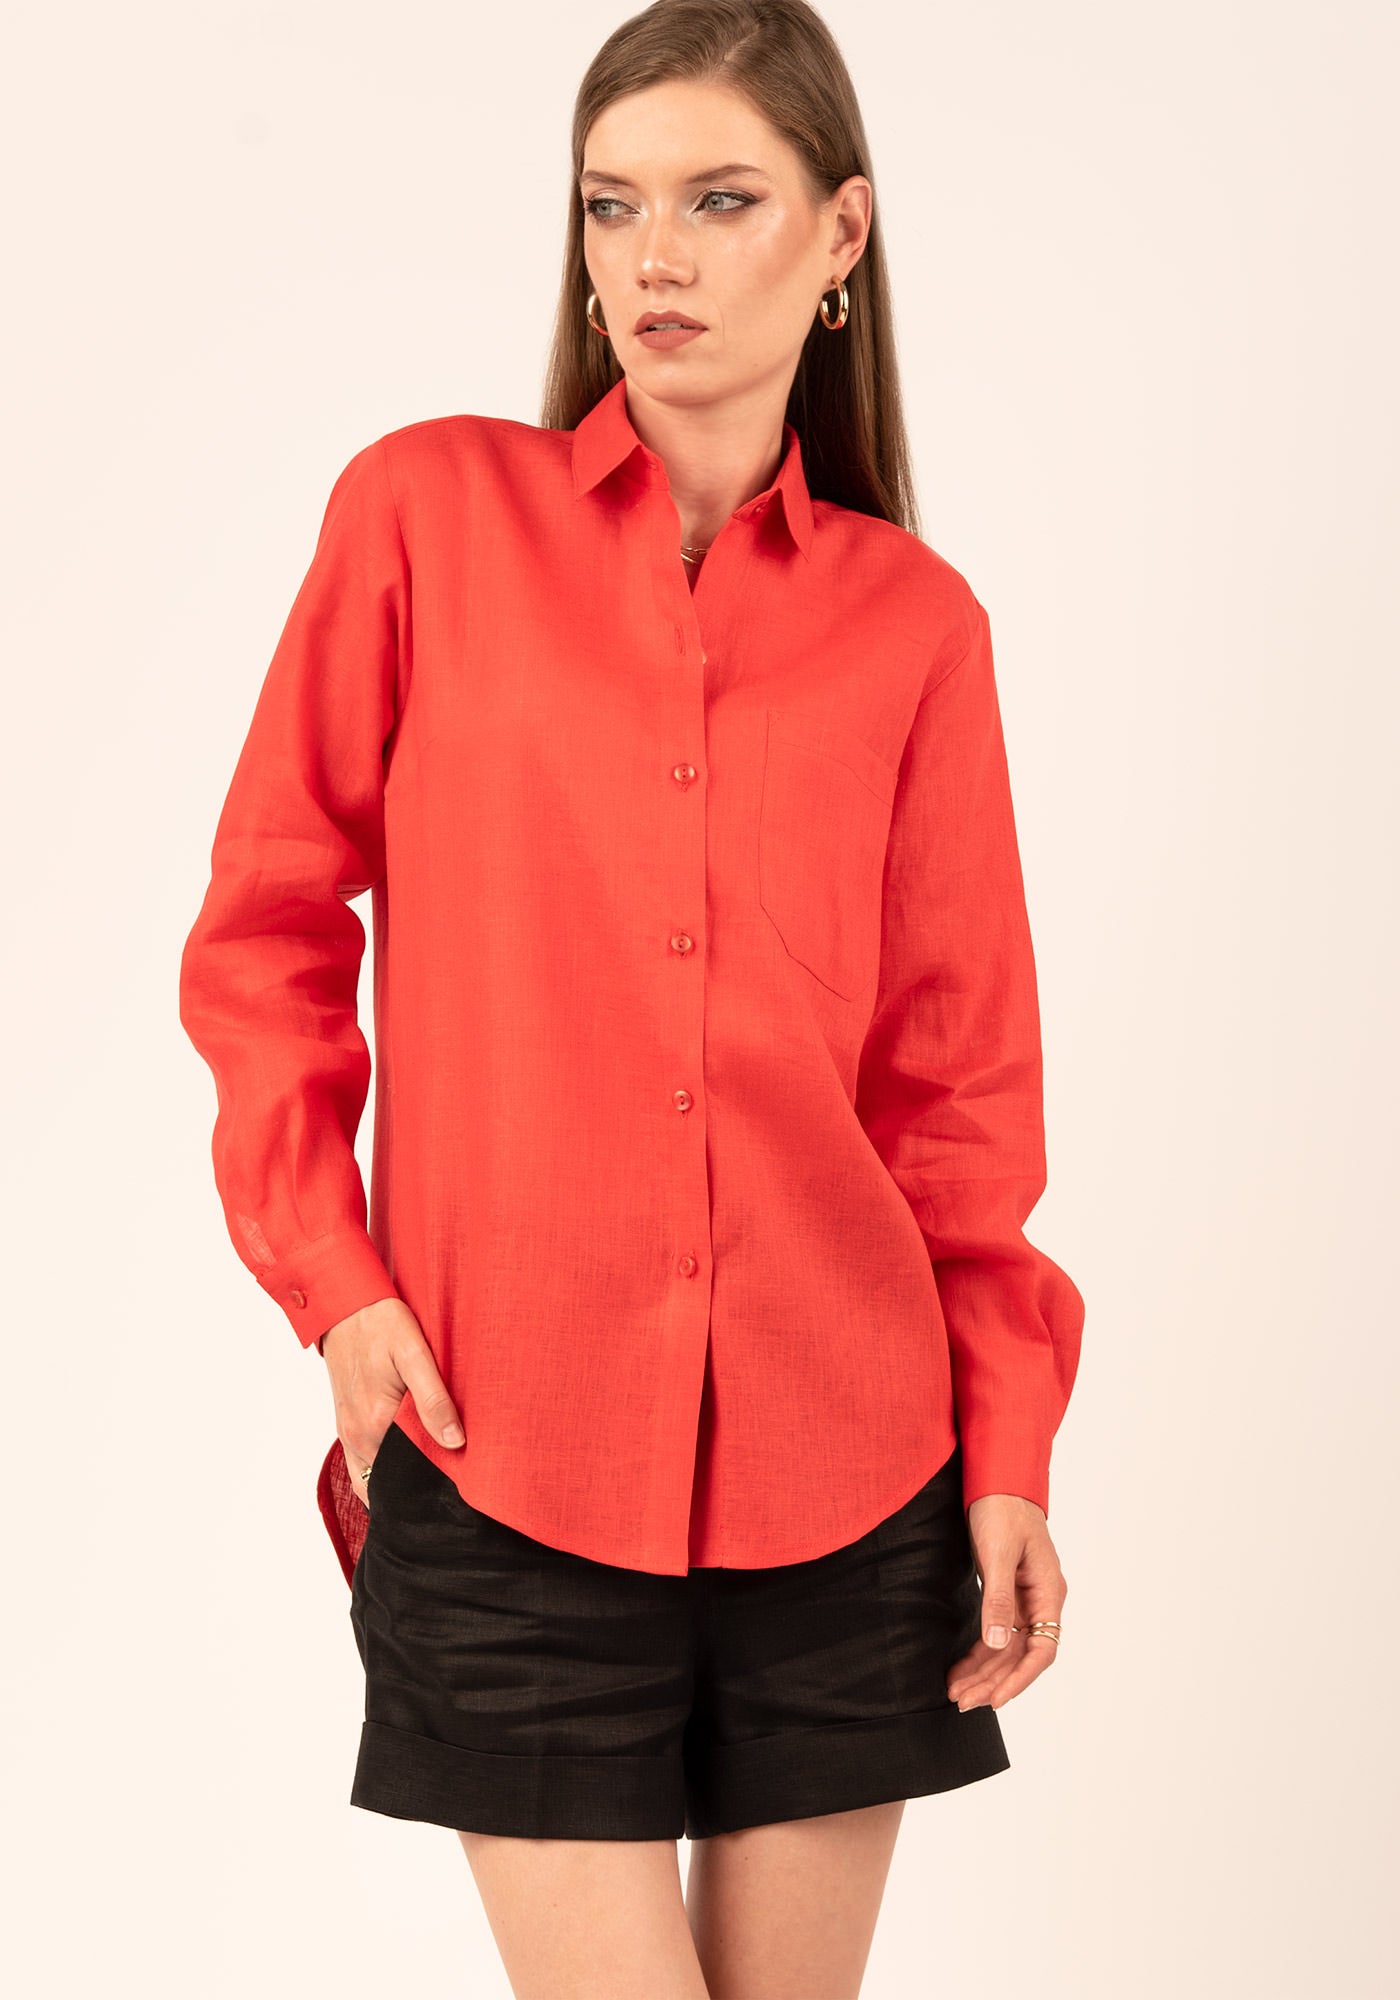 Women's Relaxed fit Linen Shirt in Scarlet red